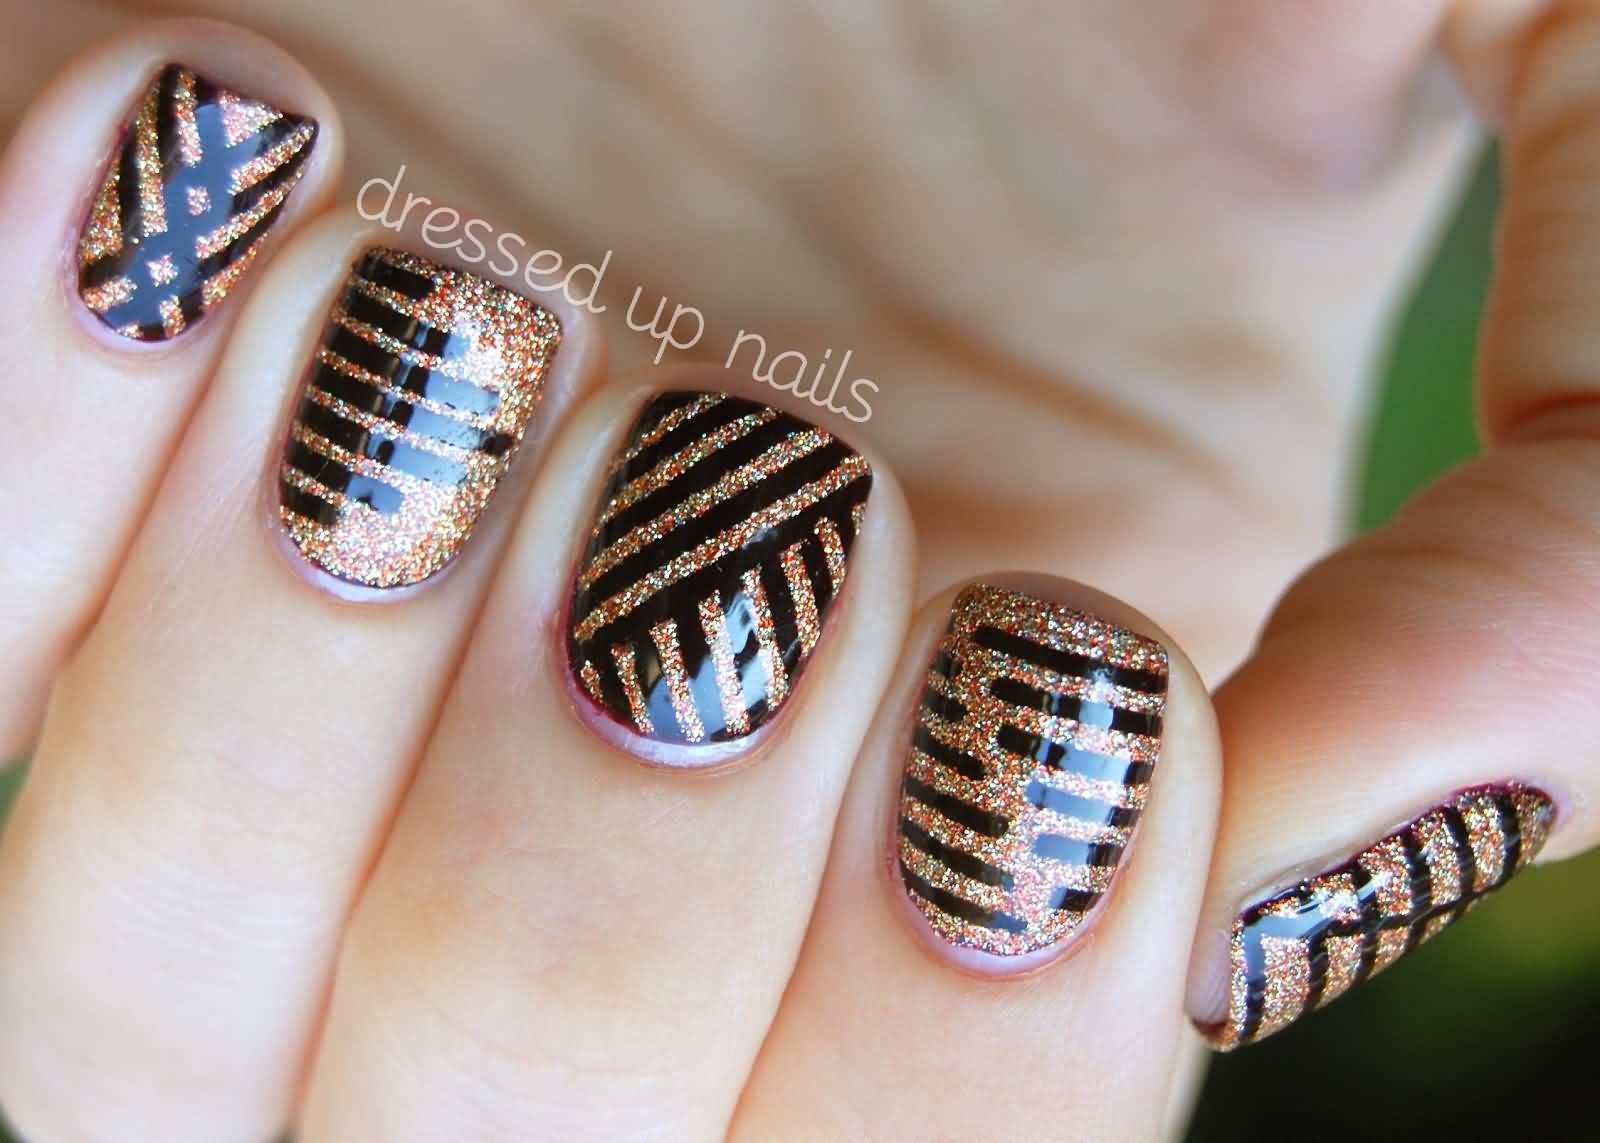 Black and Glitter Nail Art Inspiration on Tumblr - wide 9